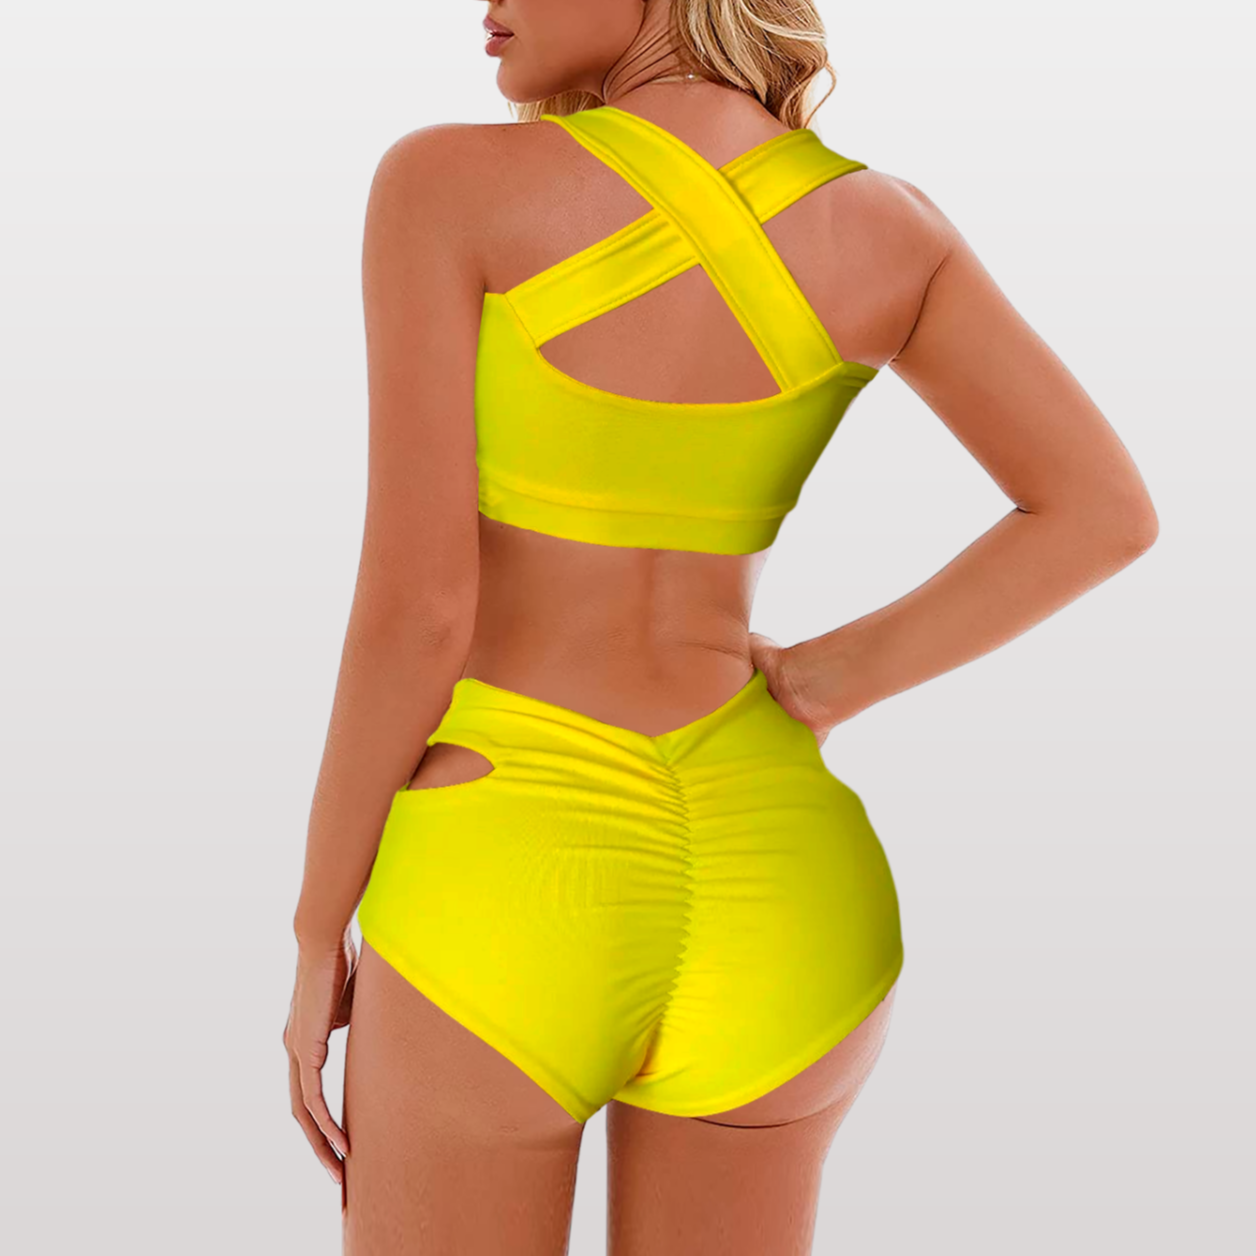 Yellow pole dance outfit with best support of bust and side cut-out panty